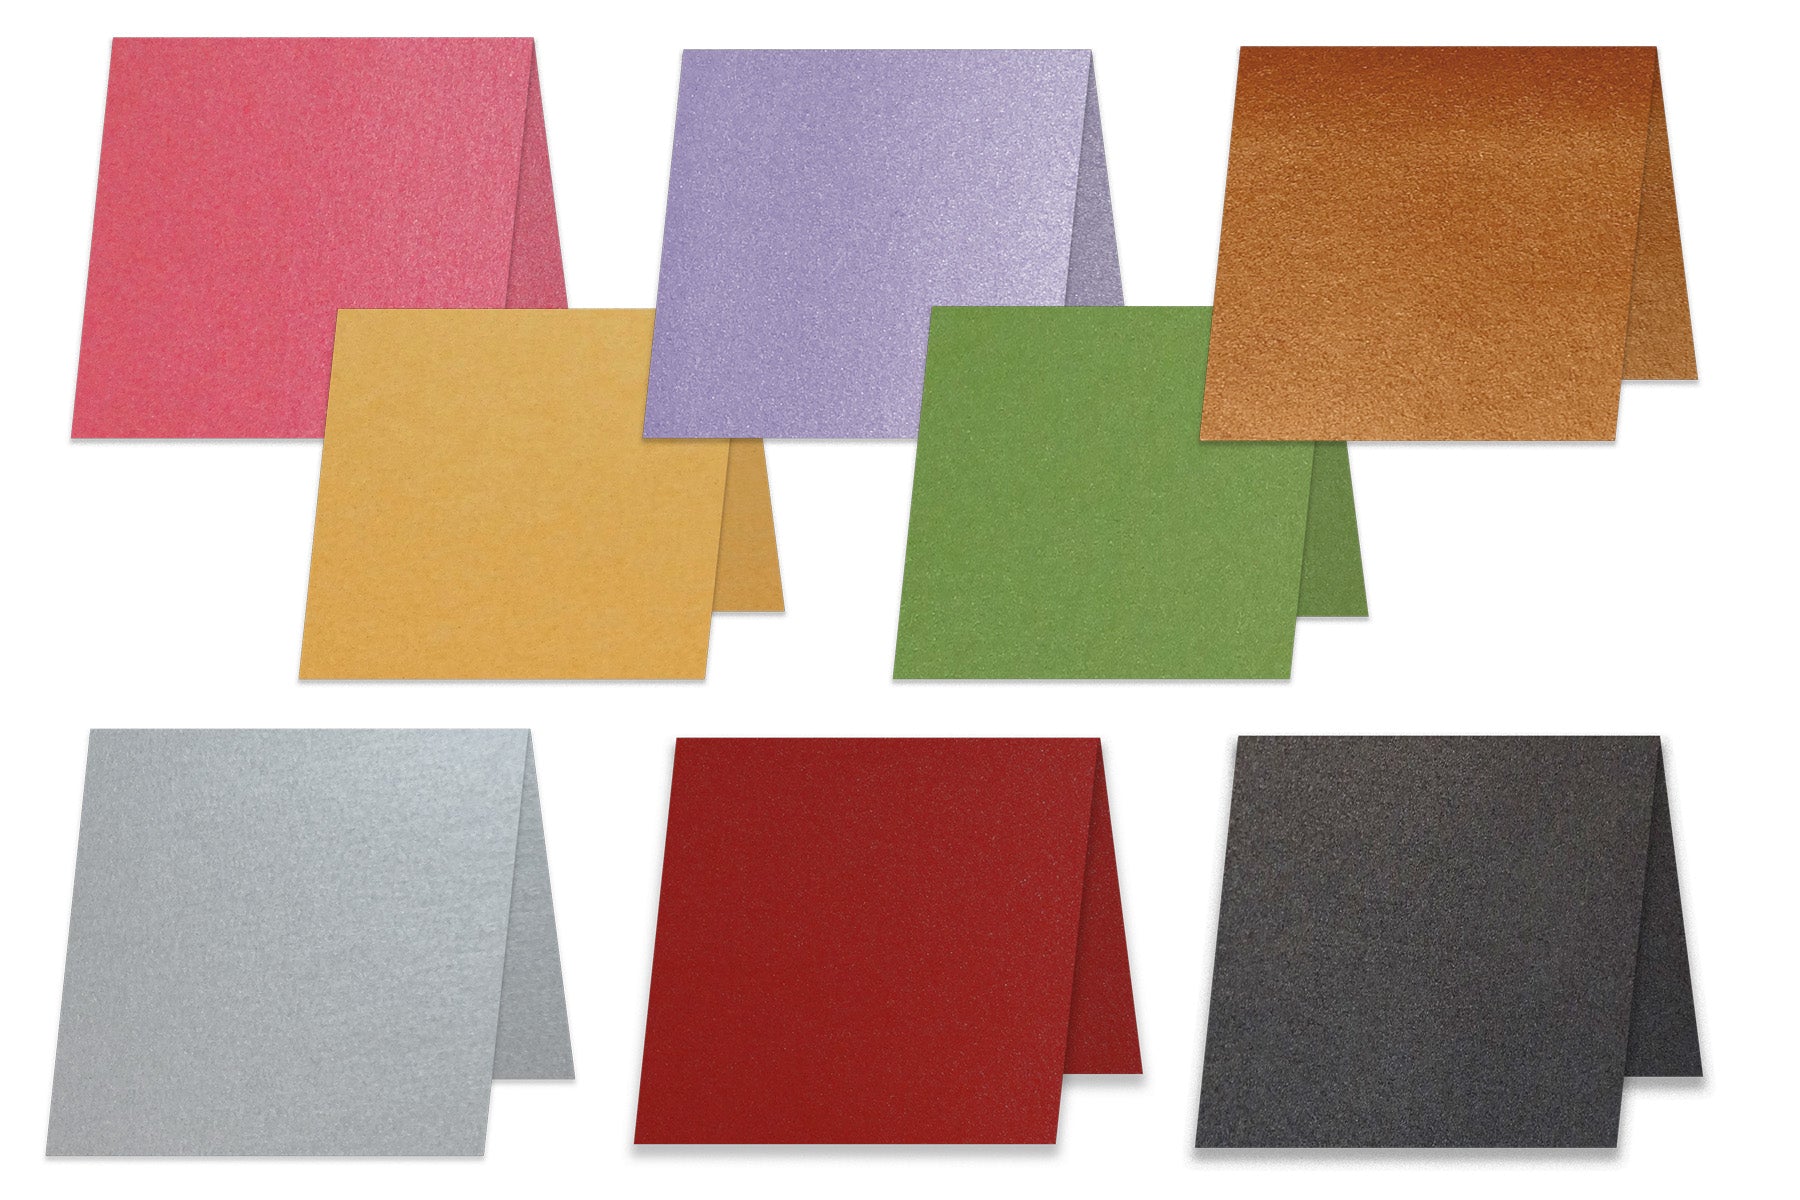 Discount A2 Folded Card Stock for DIY cards and invitations - CutCardStock